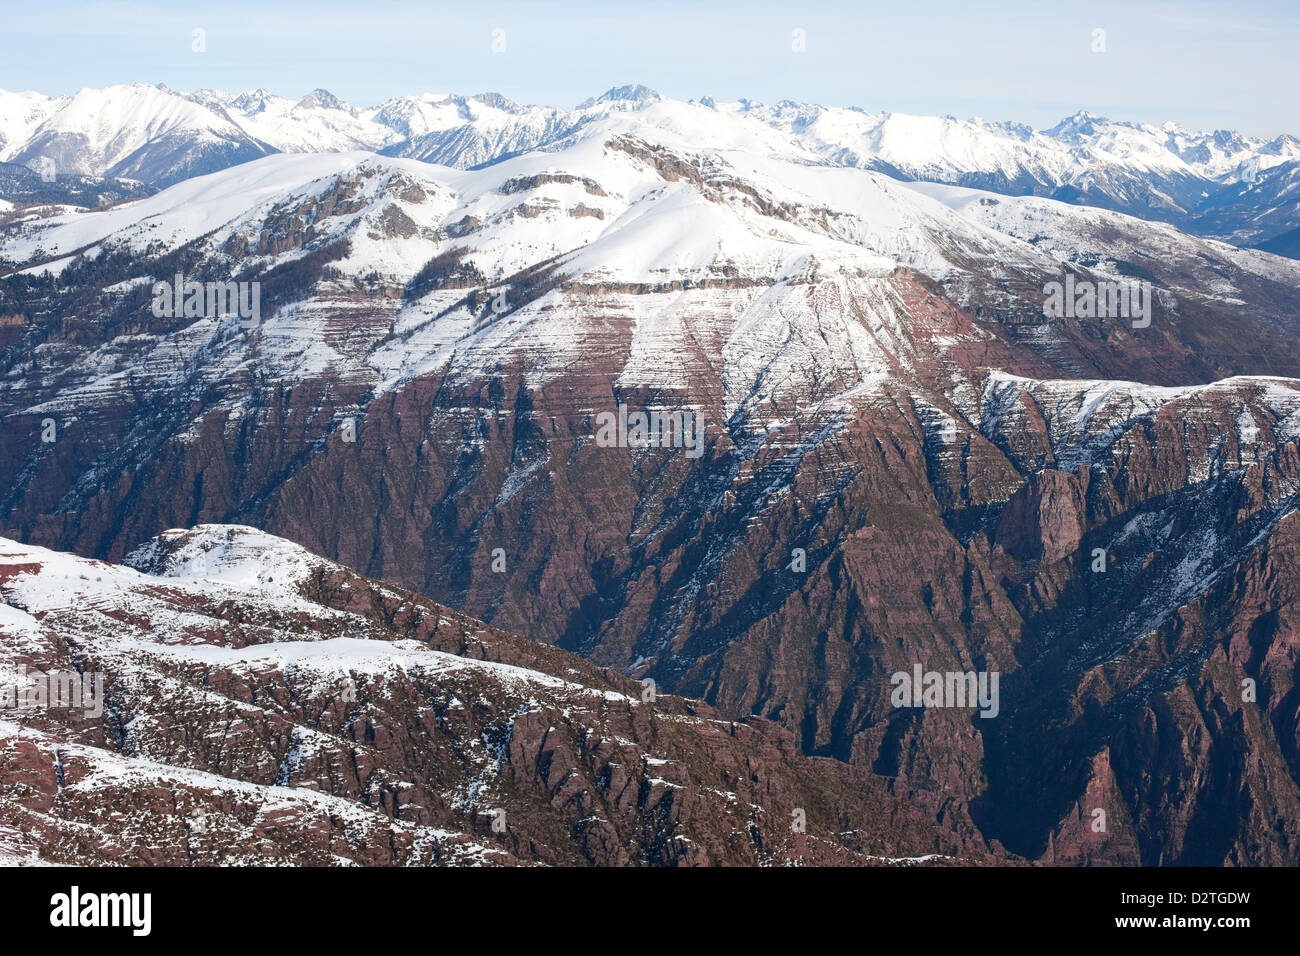 AERIAL VIEW. The Cians Gorge with its distinctive red-brown pelite rock and the Mercantour Alps on the horizon. French Riviera's backcountry, France. Stock Photo